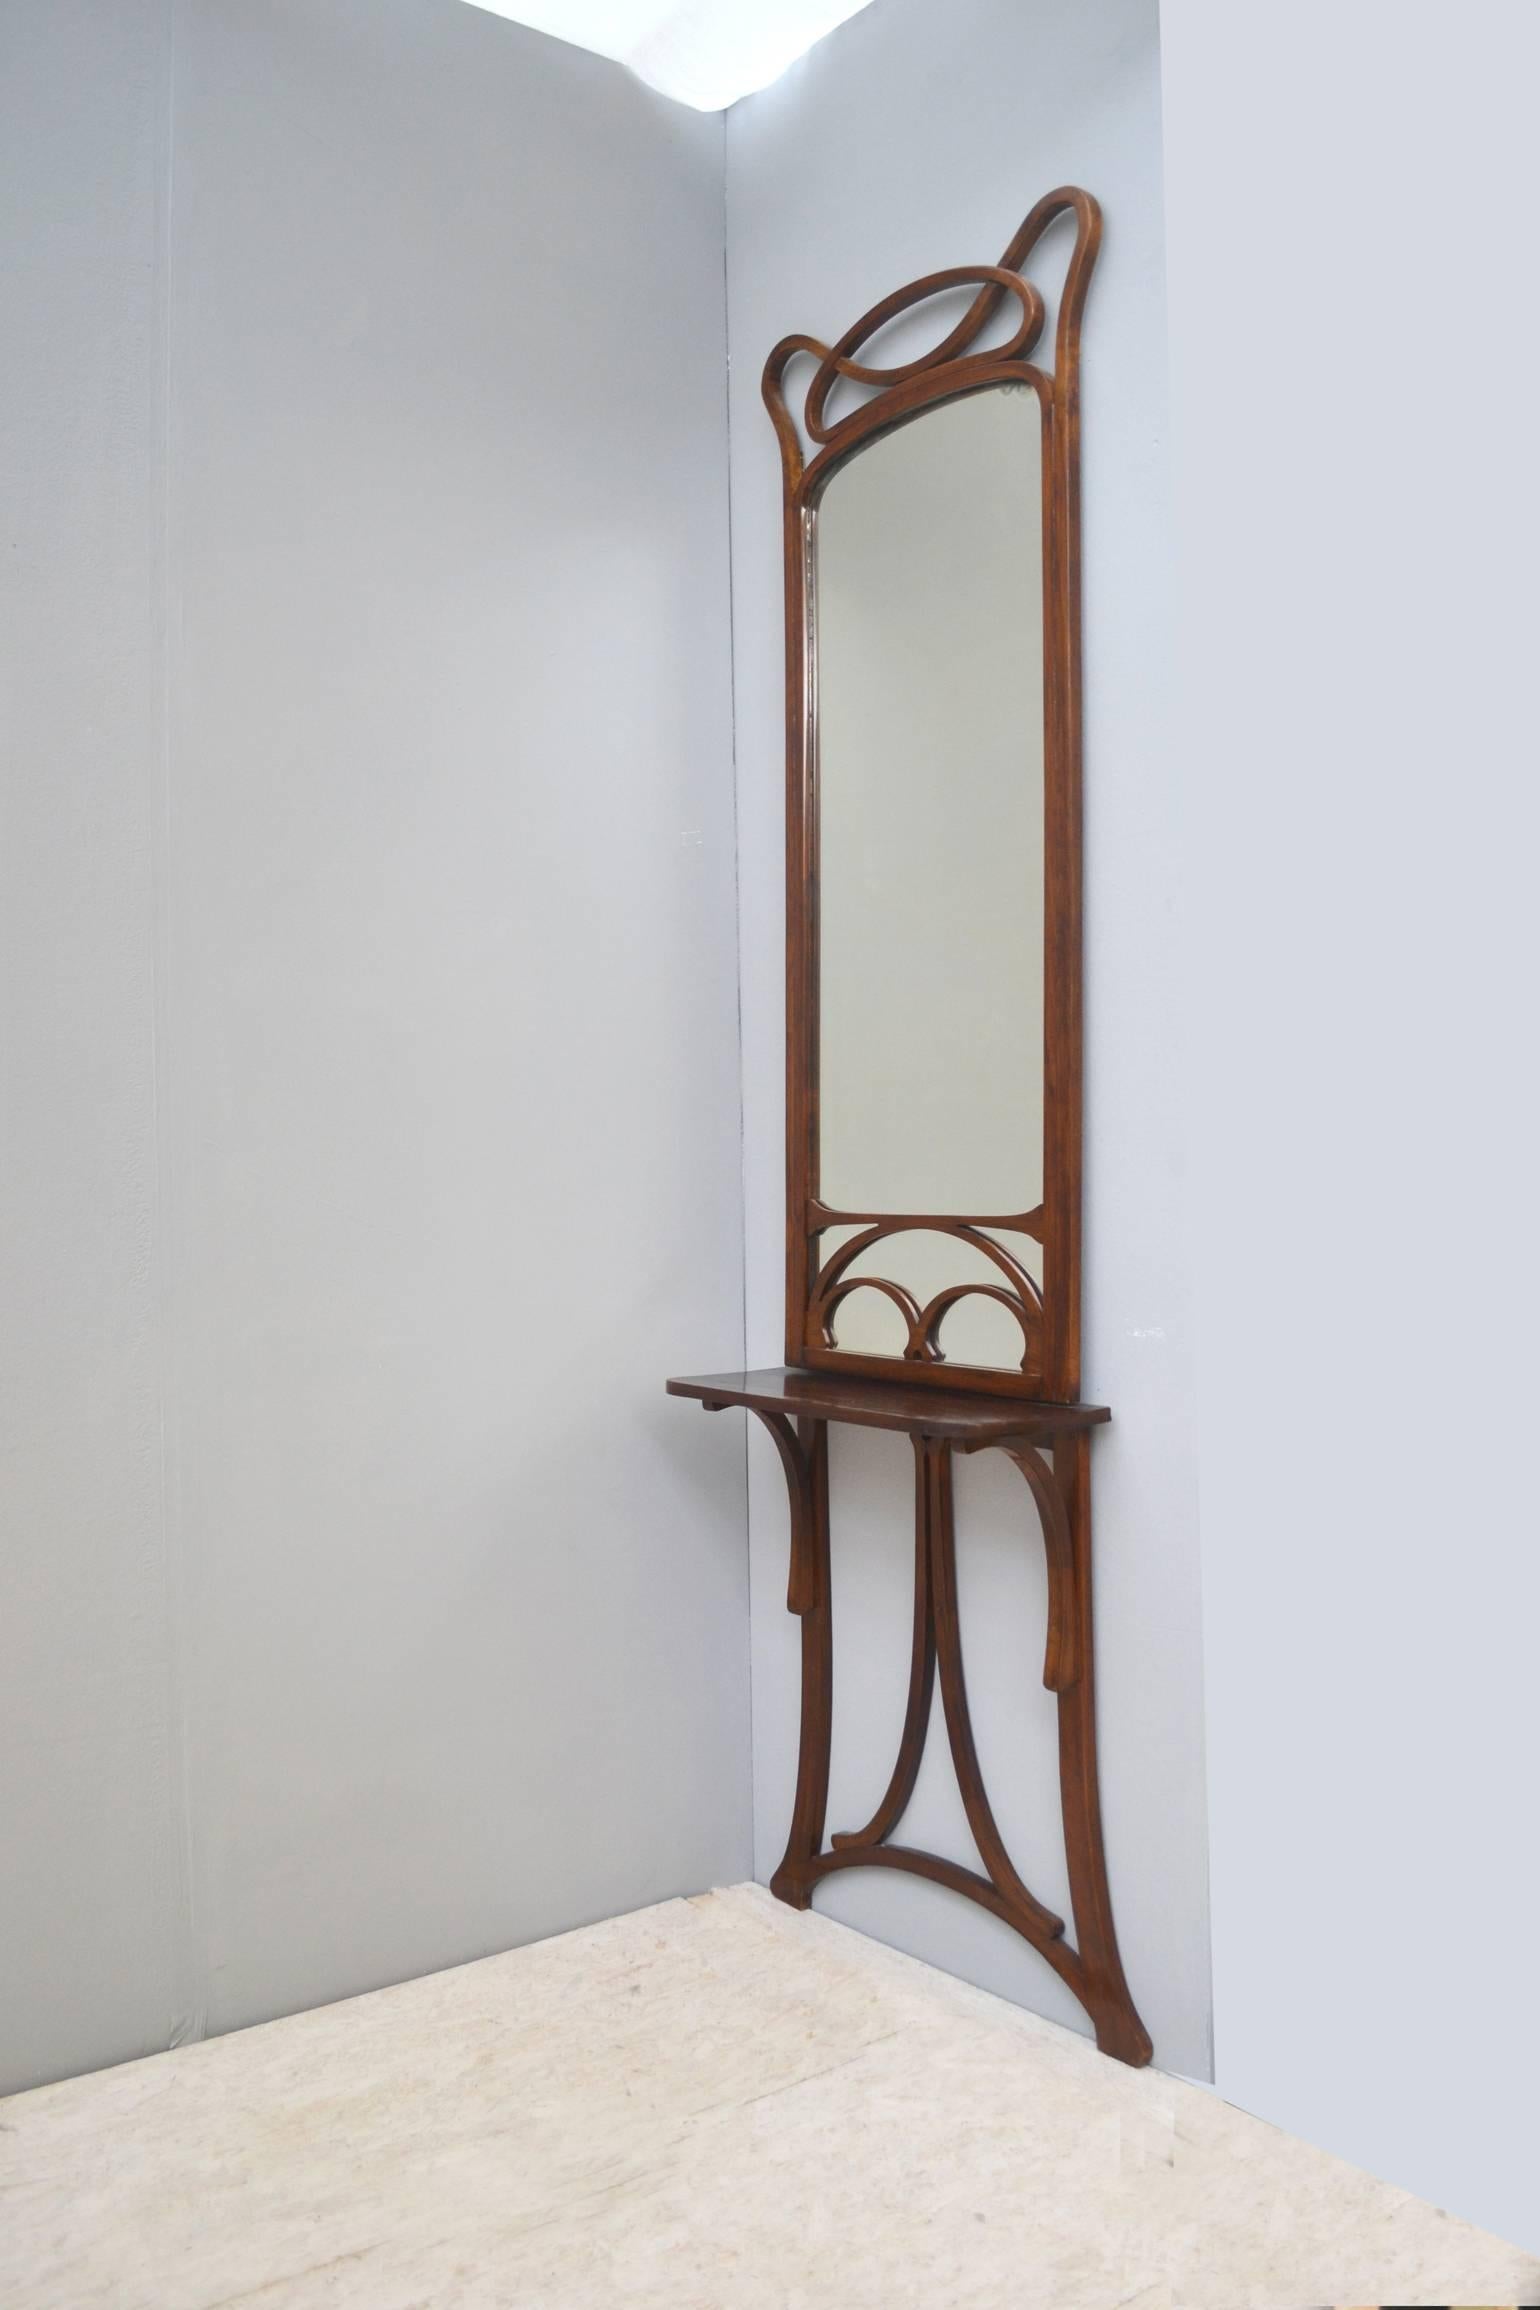 Original Viennese beech bentwood hall mirror with console stand.
The mirror has some minor oxidation to small areas to the lower side and top edges, but only adds character and confirms age and originality.

Thonet label is placed on the